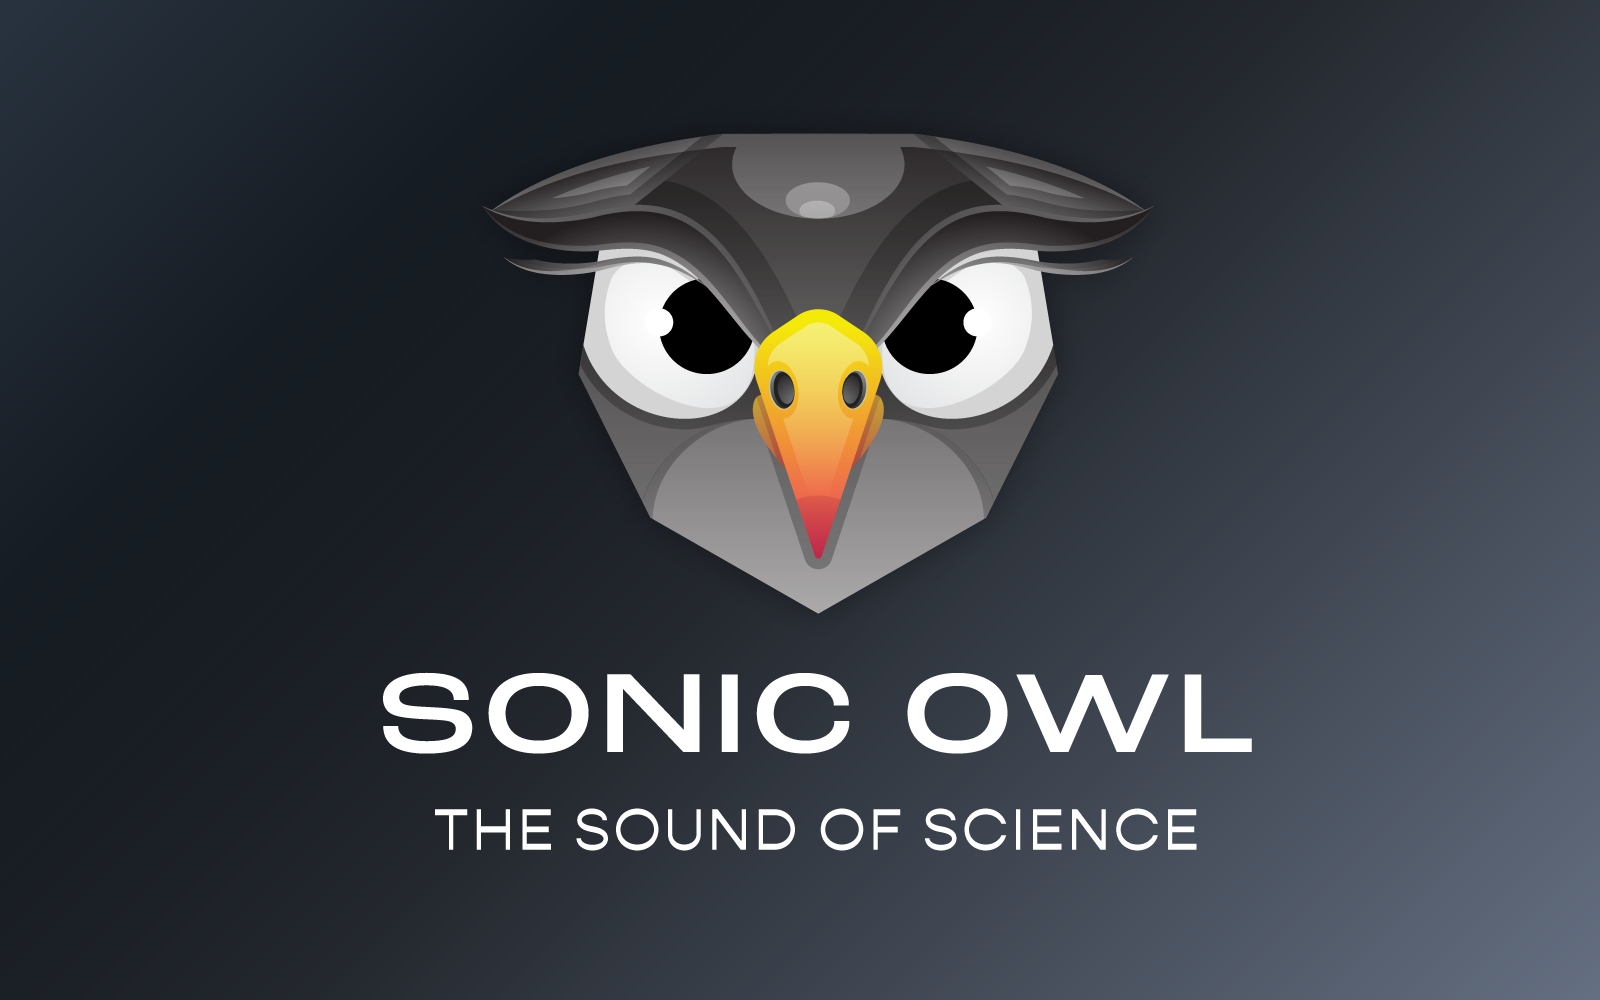 Sonic Owl Colorful Gradient Logo Template